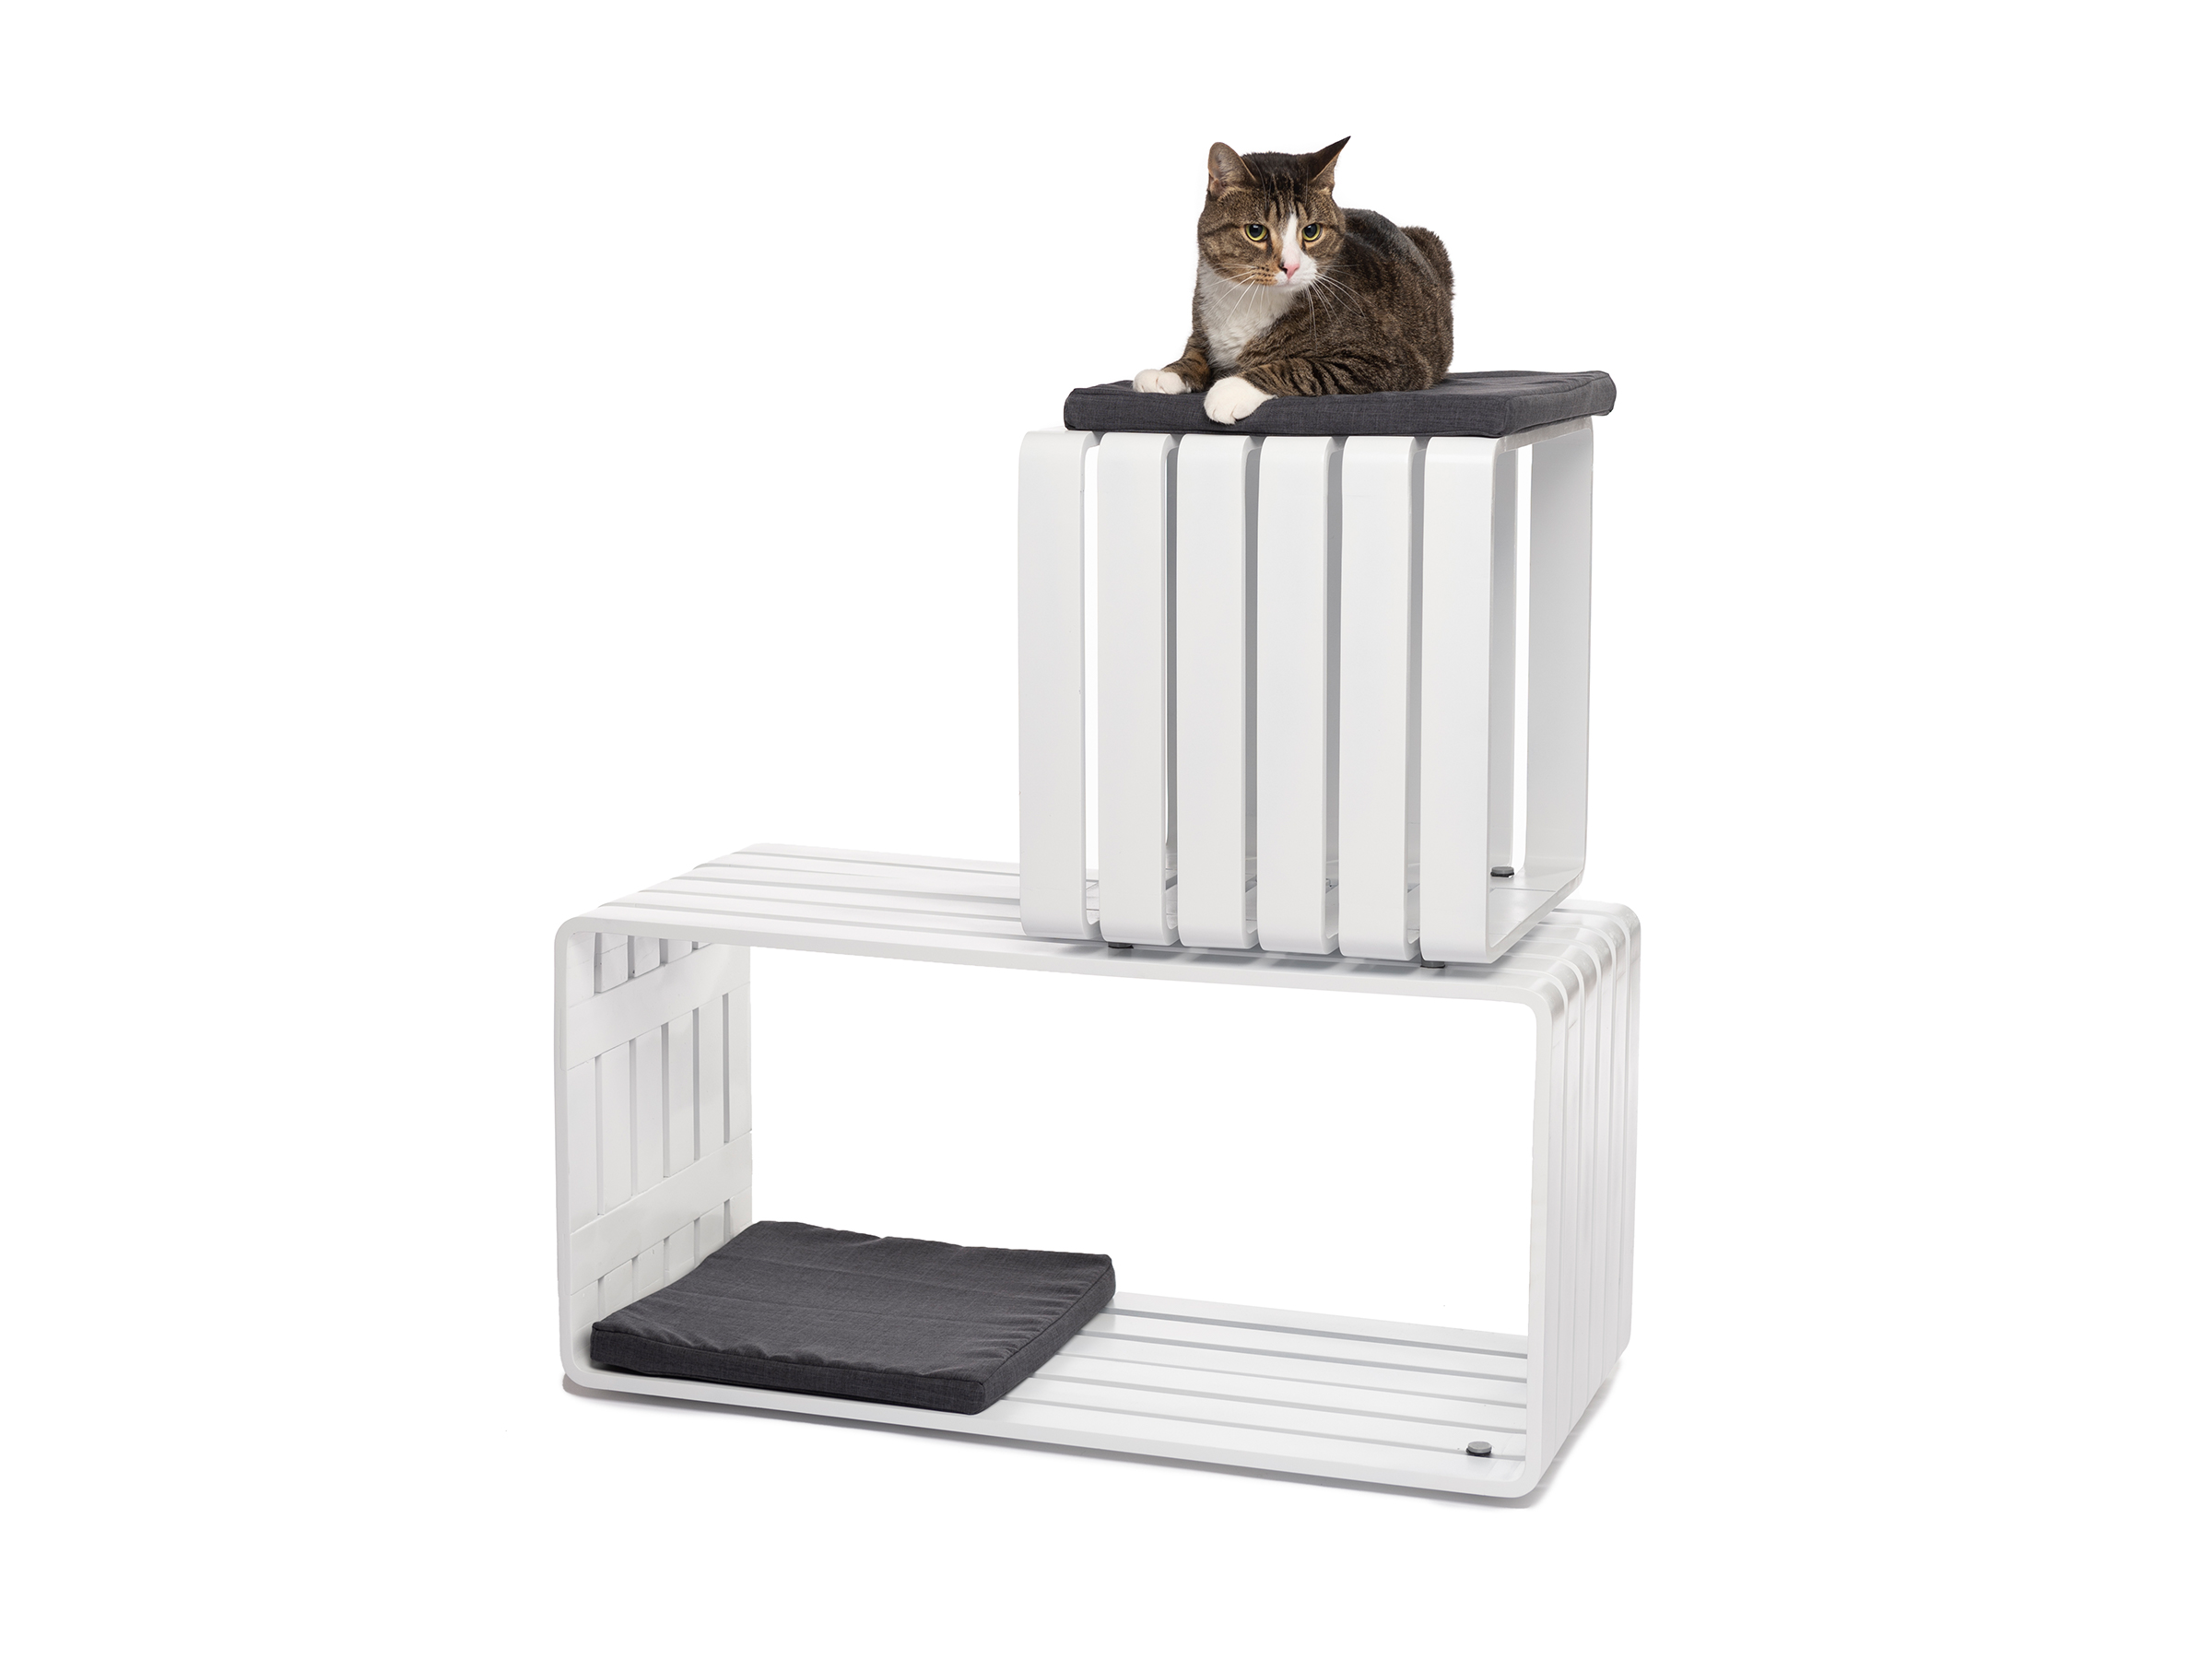 Slatted Cat Tower with cat